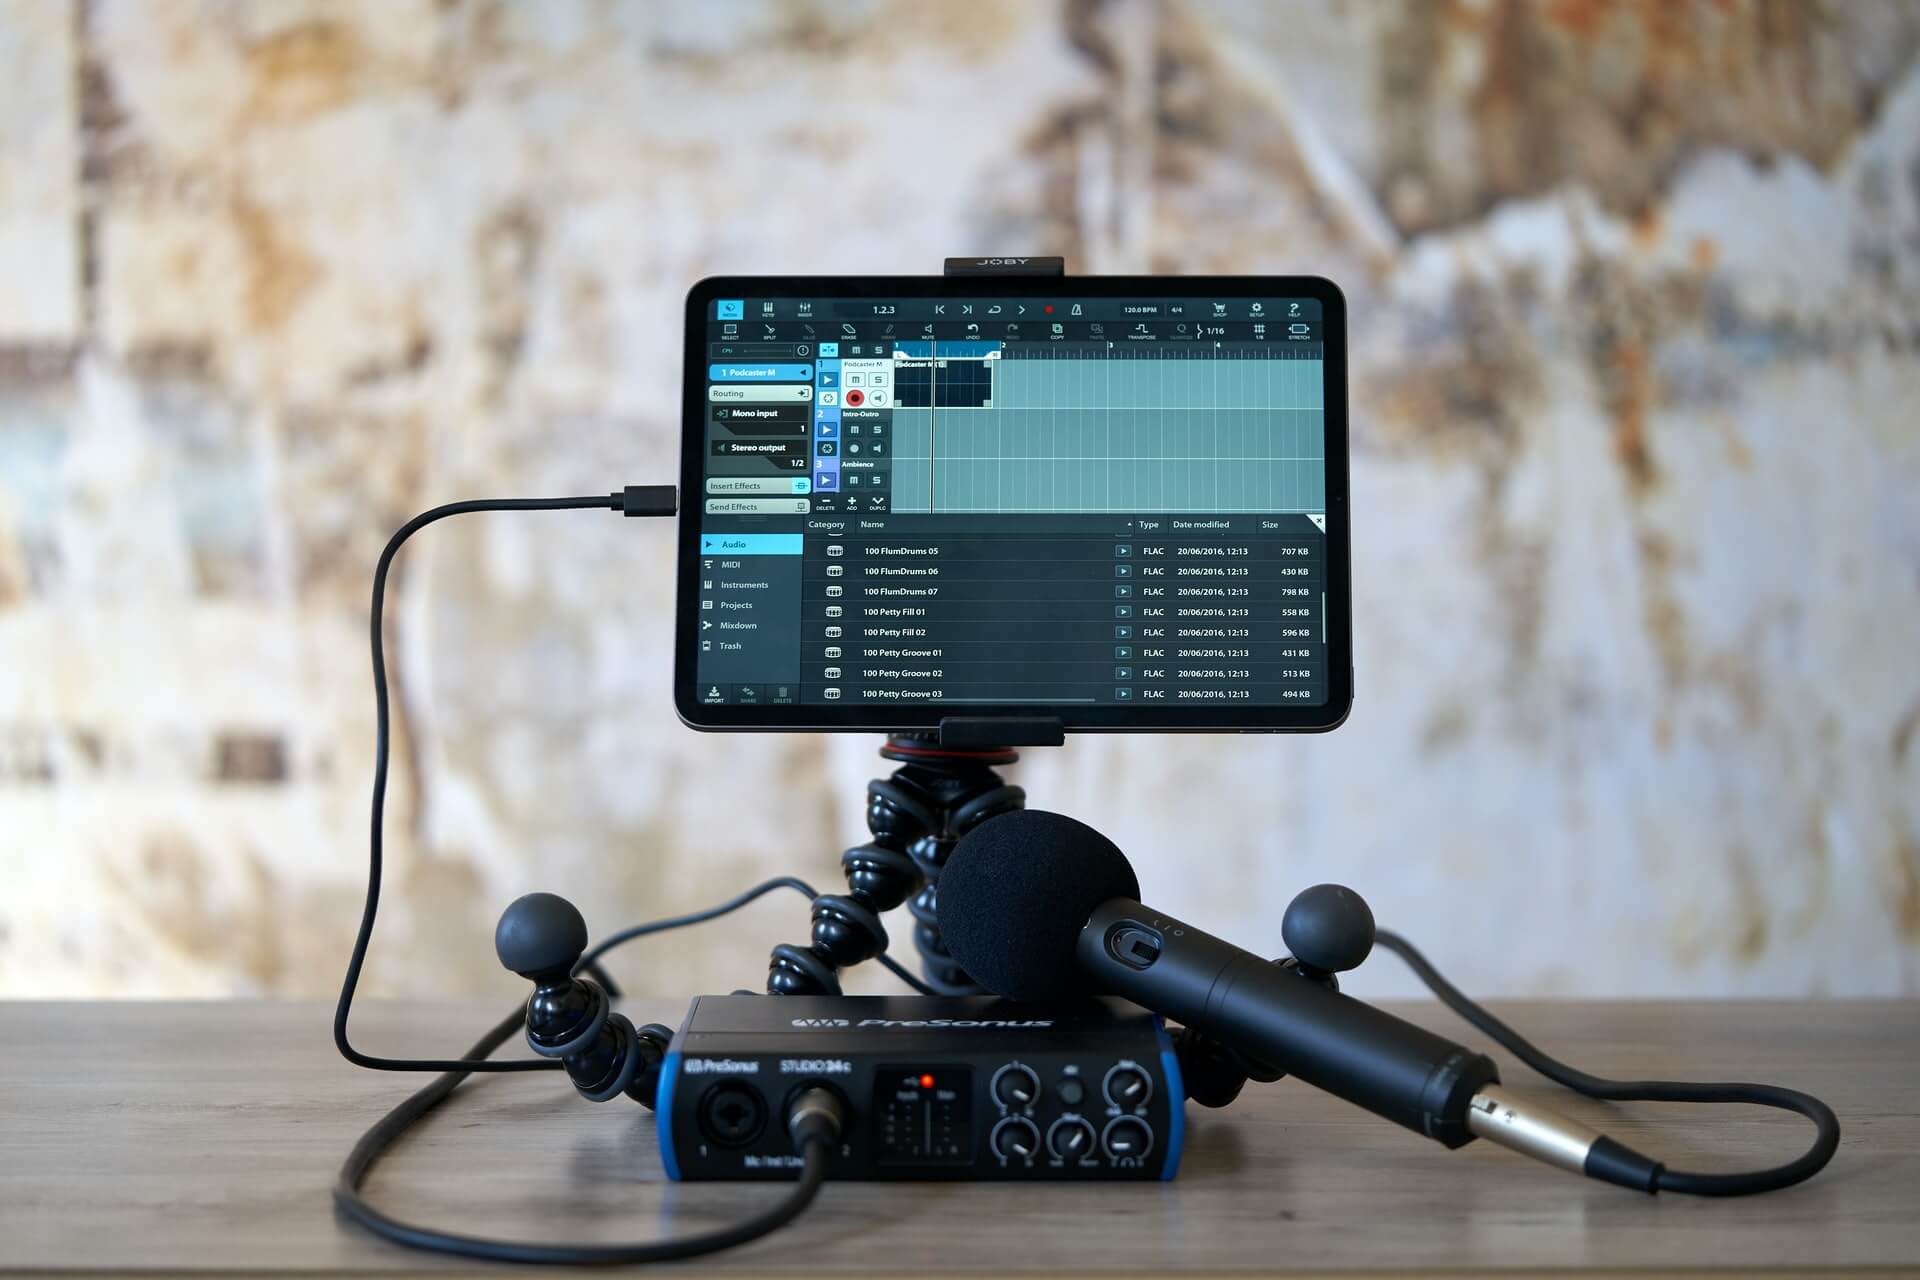 A Streaming and podcasting device set up.